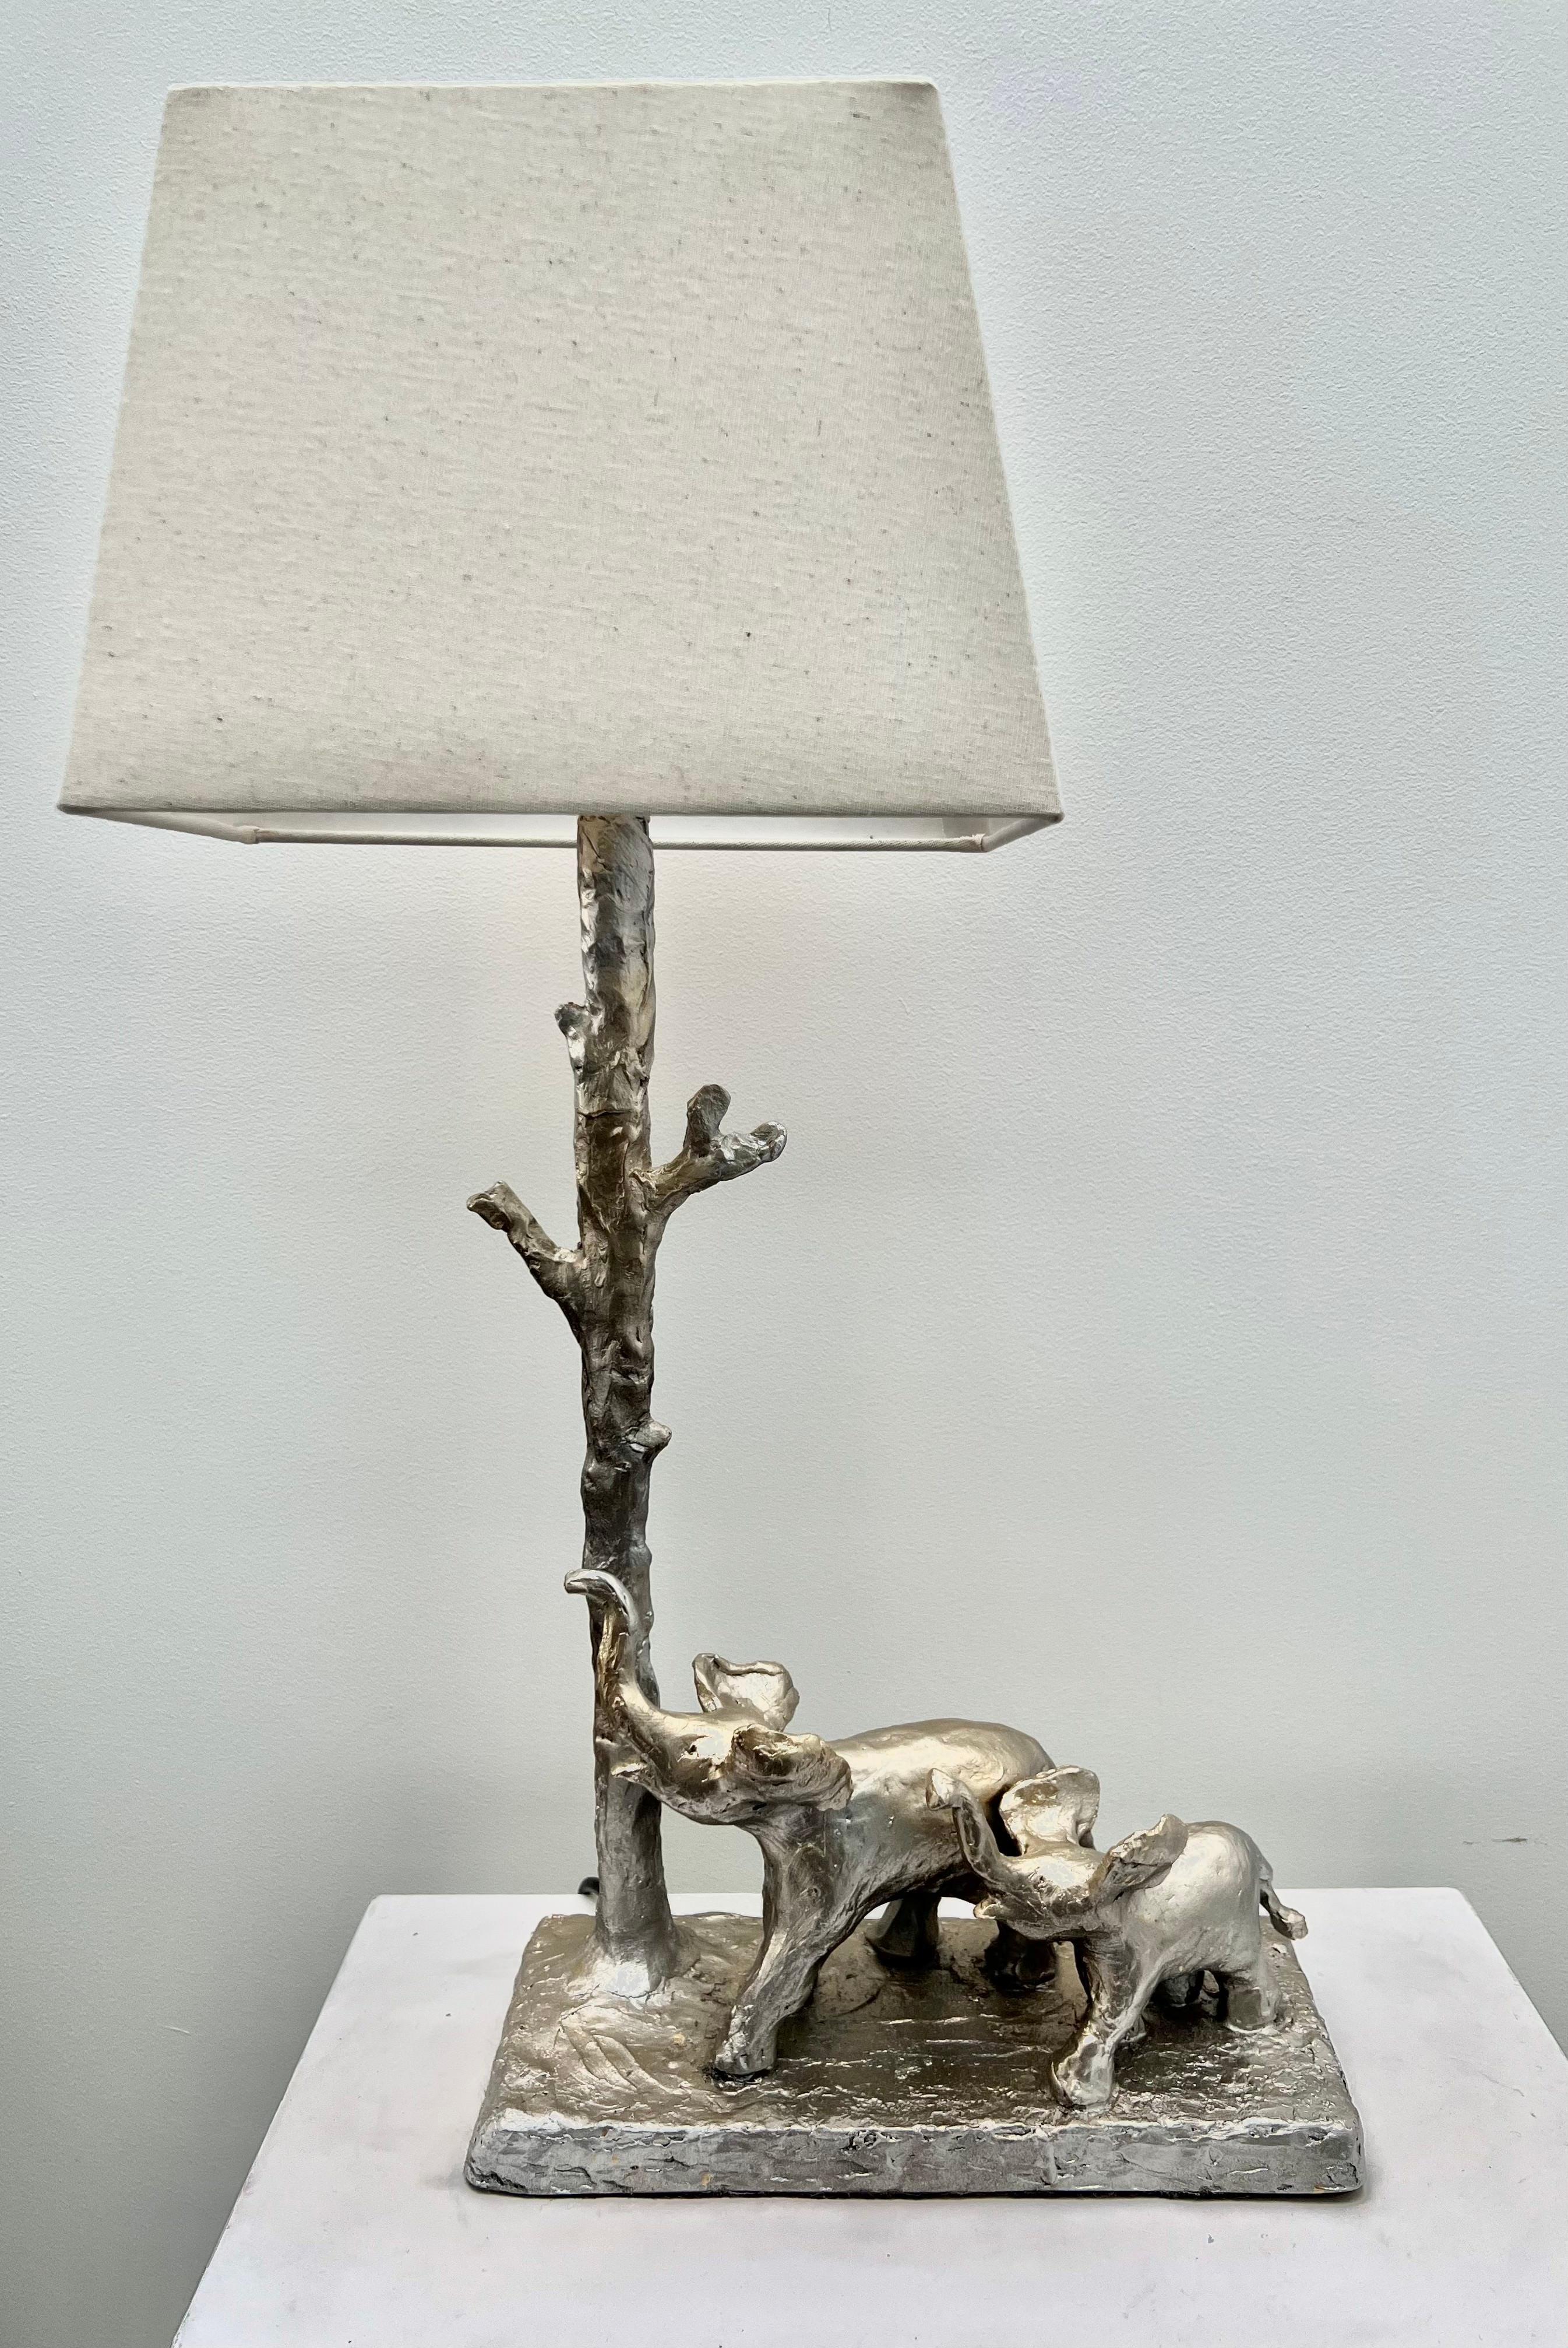 A  sculptural table lamp of  mother and baby elephants happily strolling  with their trunks up . A functional artwork,  hand crafted ,moulded and cast in resin. 
All the lamp's parts are individually crafted,  molded and cast in resin and are